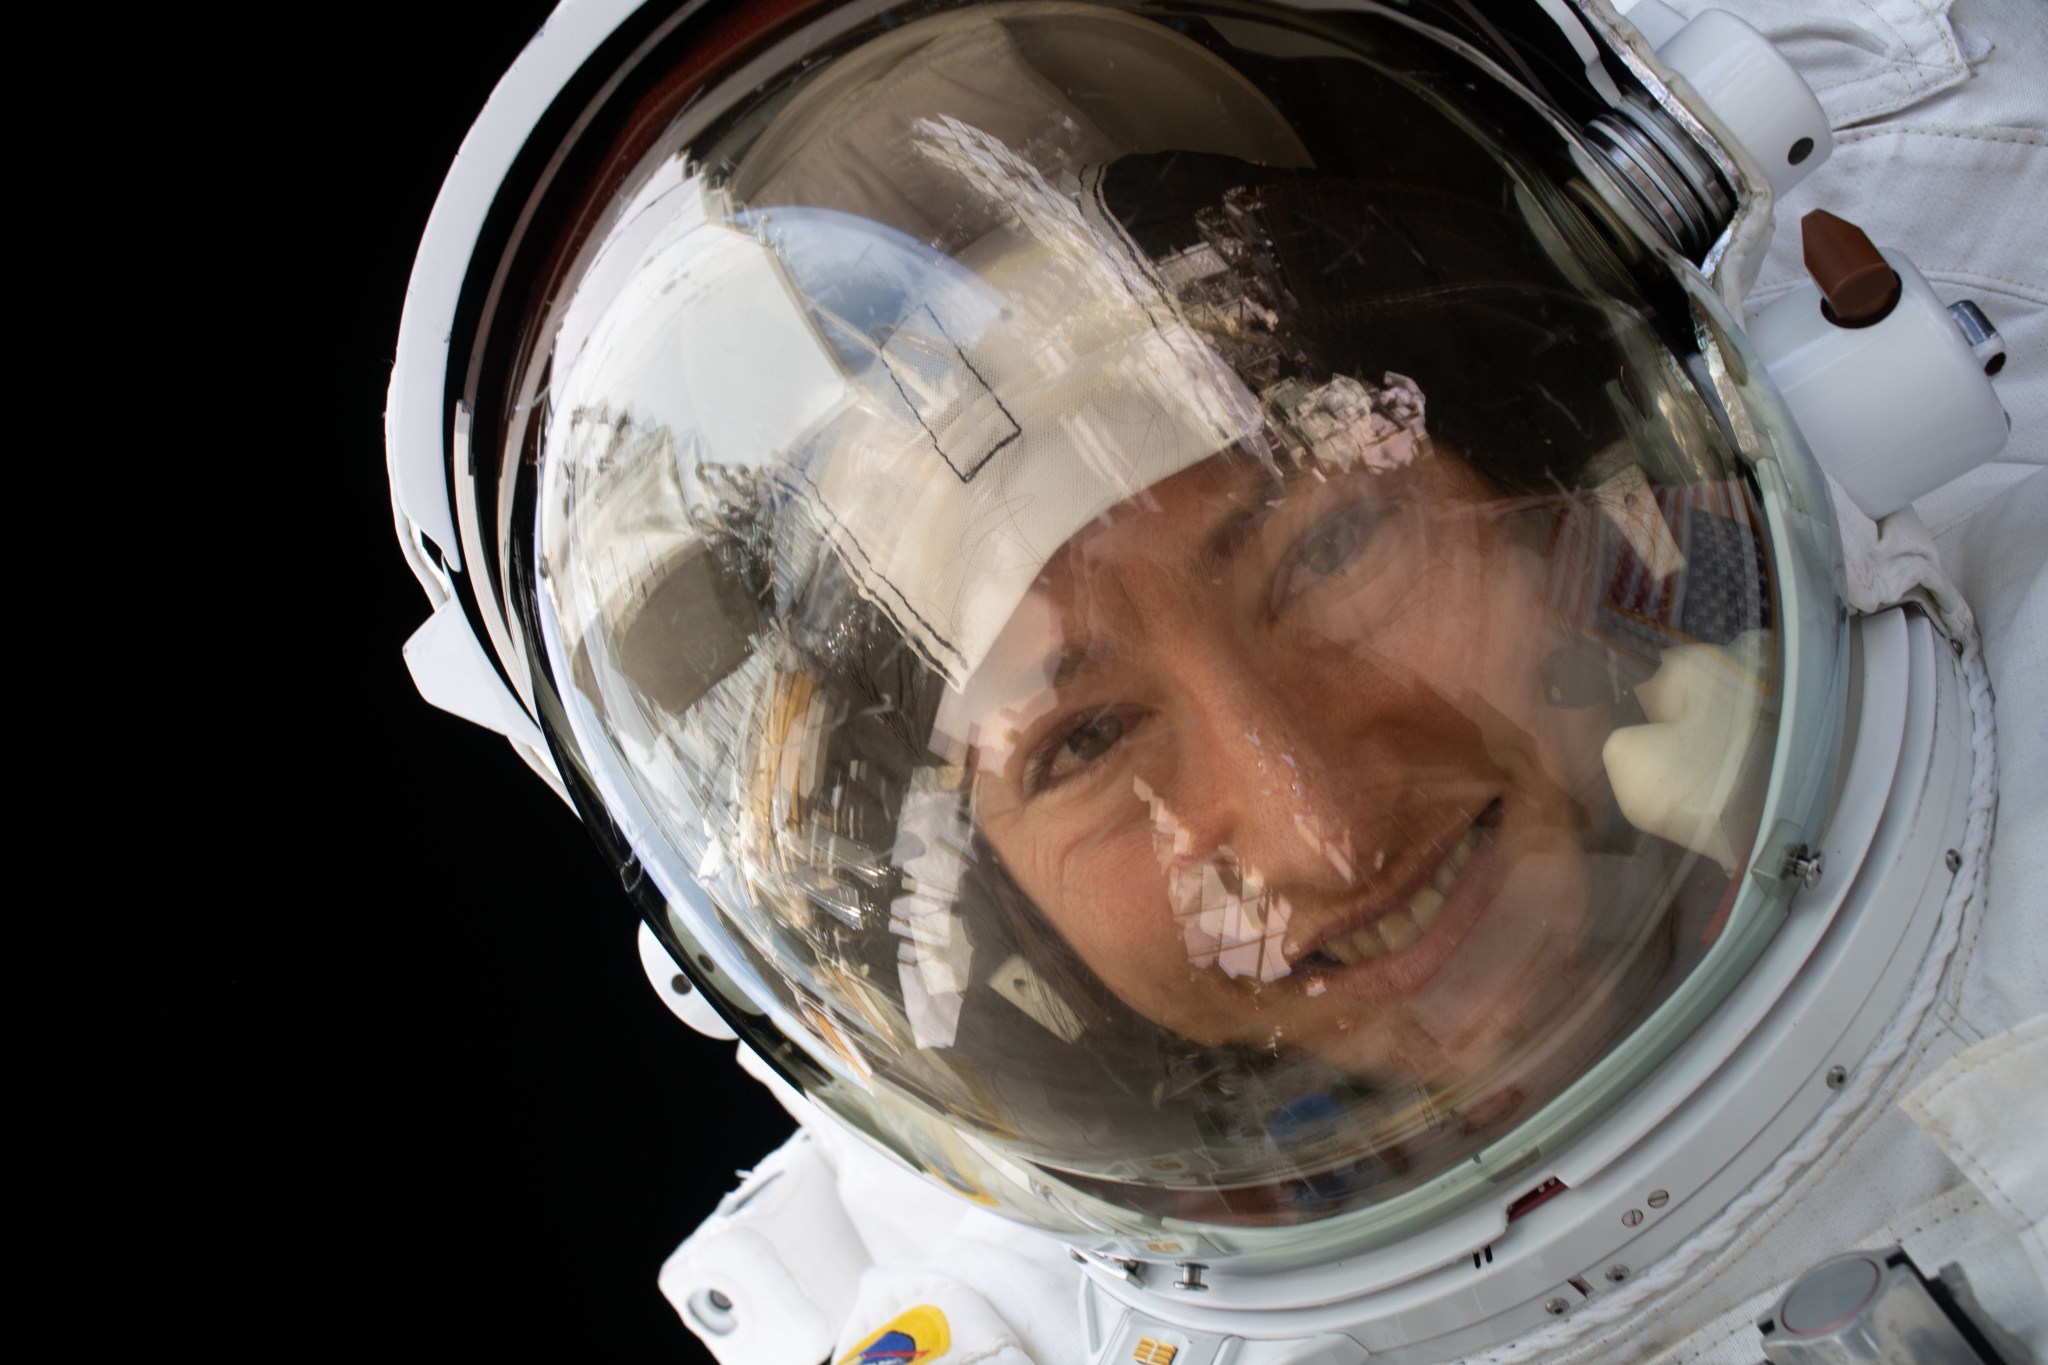 NASA astronaut Christina Koch is pictured during a spacewalk